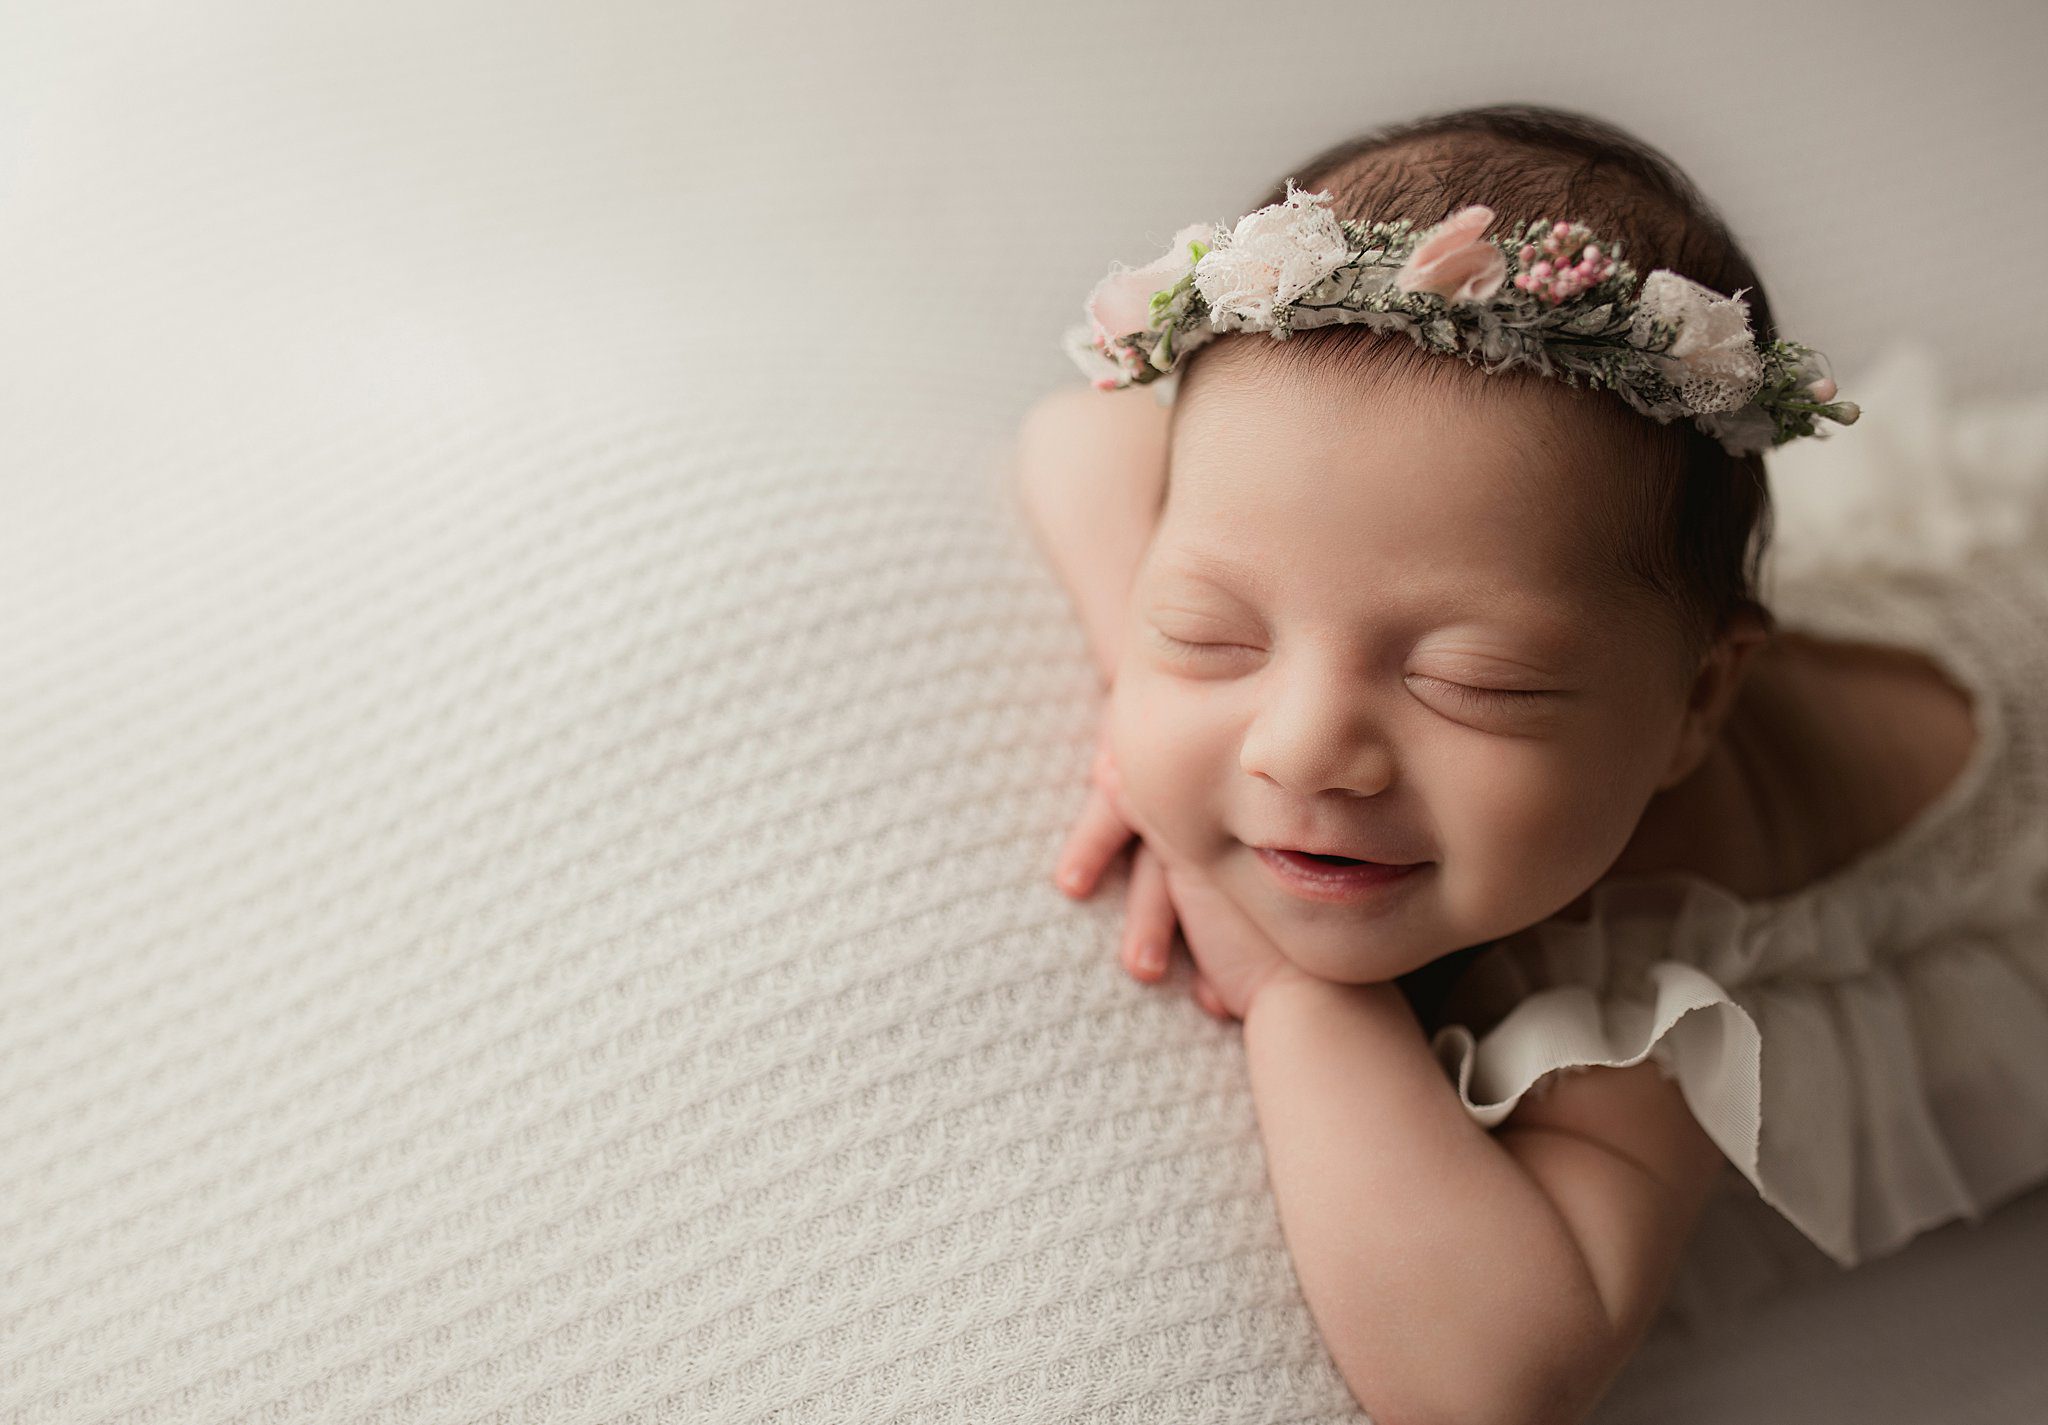 A newborn baby sleeps in a white dress and floral headband with a smile